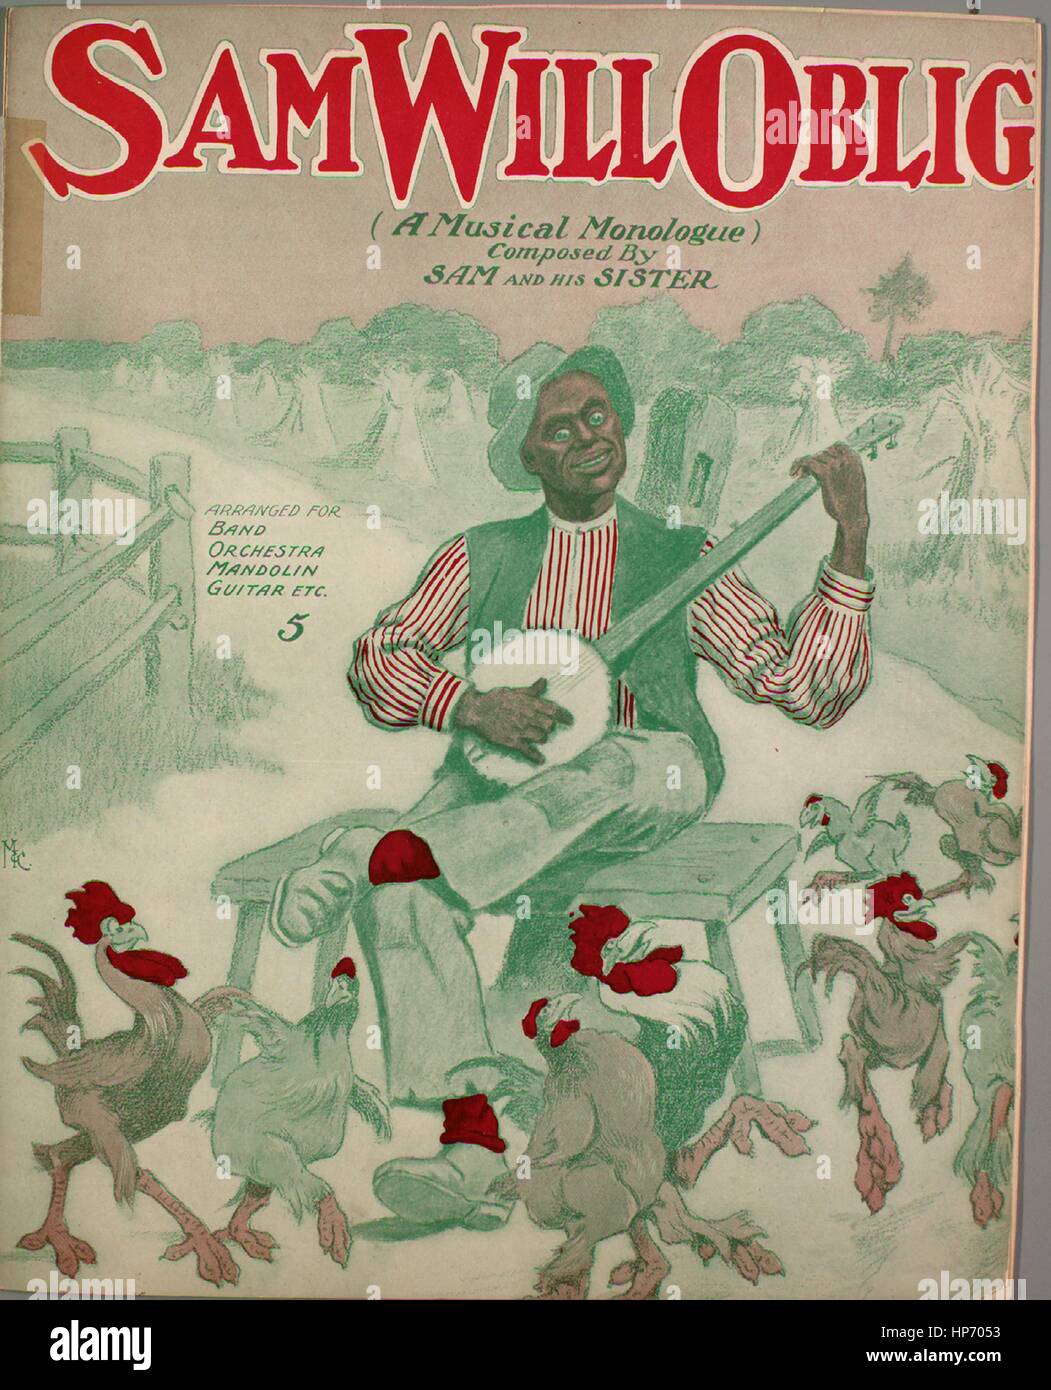 Sheet music cover image of the song 'Sam Will Oblige (A Musical Monolugue)', with original authorship notes reading 'Composed by Sam and His Sister', United States, 1900. The publisher is listed as 'Edwin S. Brill?]', the form of composition is 'sectional [with descriptive captions, e.g., 'Don't dem harmonious strains done tickle yo' feet']', the instrumentation is 'piano', the first line reads 'None', and the illustration artist is listed as 'M and C'. Stock Photo